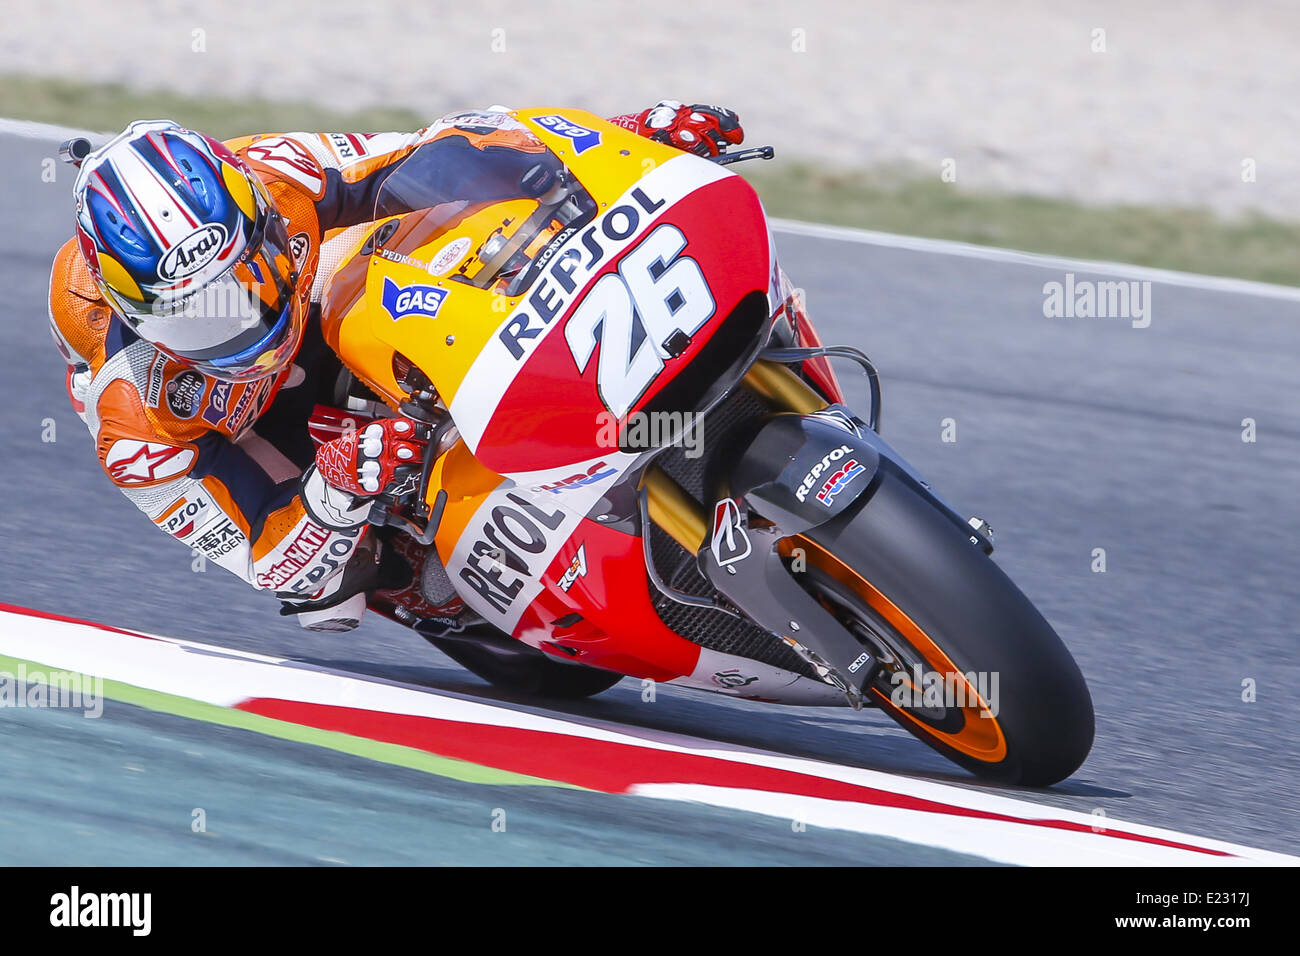 Bacelona, Spain. 13th June, 2014. Repsol Honda's DANI PEDROSA during free practice at the Catalunya MotoGP at the Barcelona-Catalunya circuit on Friday. Pedrosa is said to be feeling more comfortable on bike following his 'arm-pump' operation in May. © Mikel Trigueros/NurPhoto/ZUMAPRESS.com/Alamy Live News Stock Photo